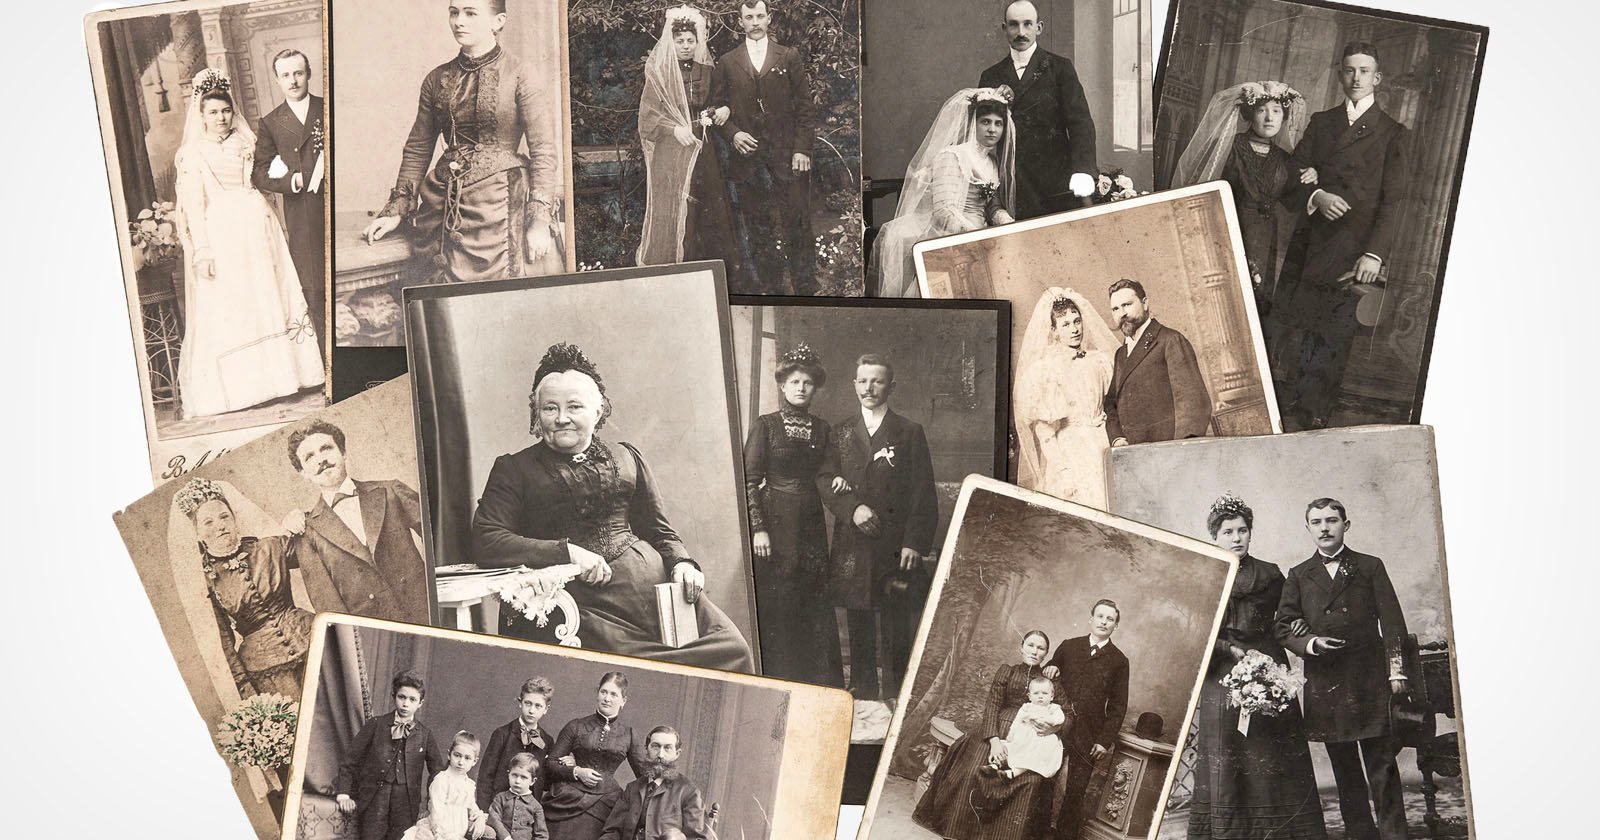 A collection of vintage black-and-white photographs featuring various formal portraits of individuals, couples, and families in traditional attire from the late 19th to early 20th century. Some images show wedding scenes, while others depict formal family gatherings.